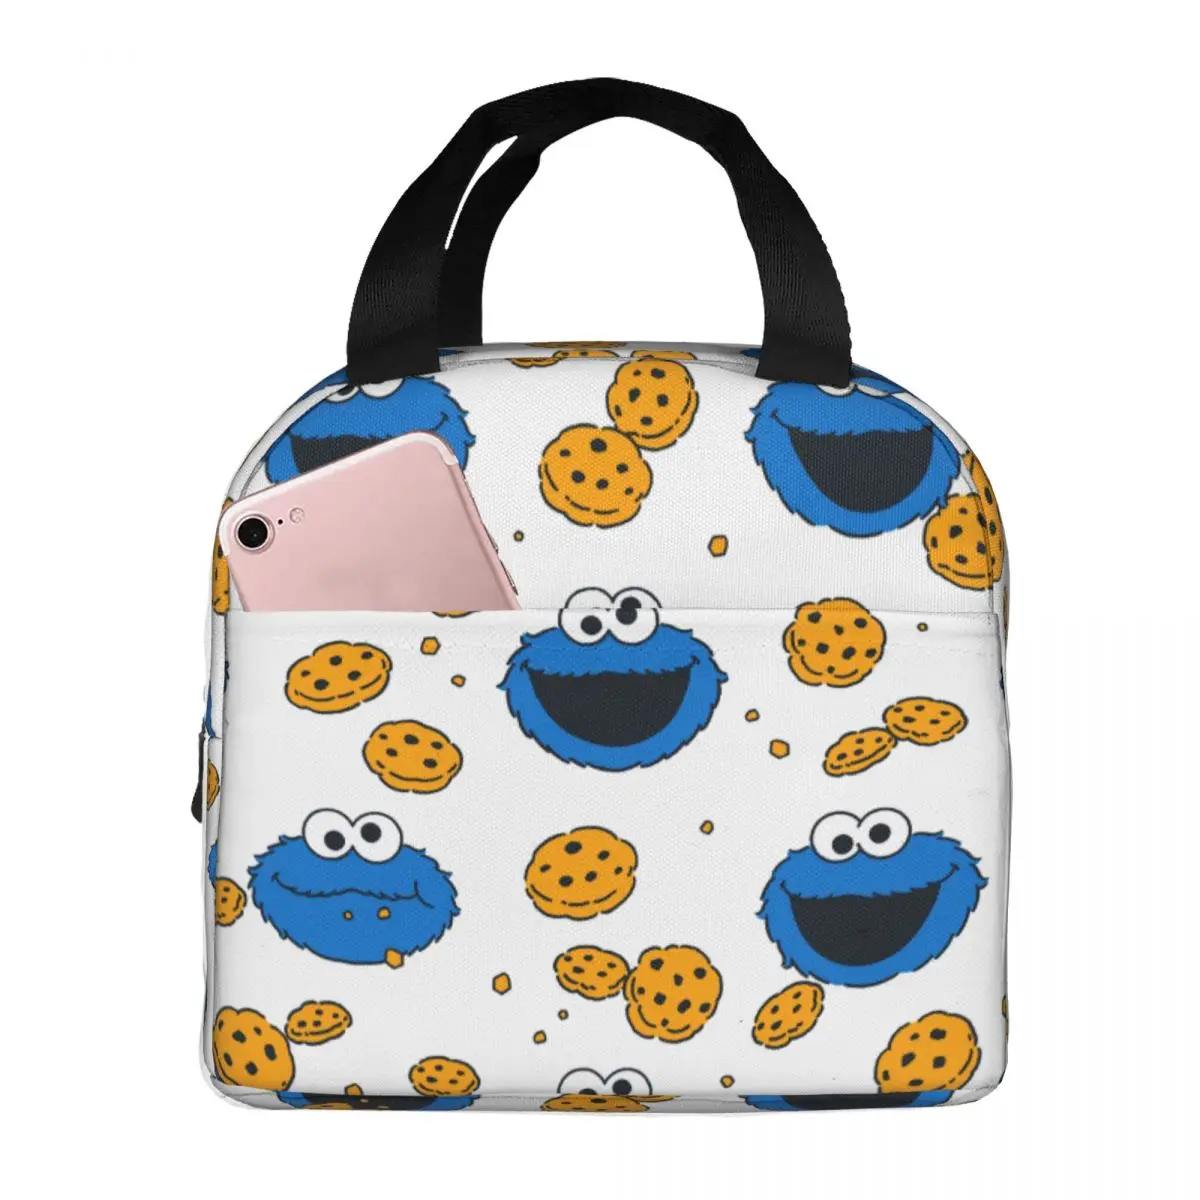 Lunch Bag for Women Kids Cookie Monster Thermal Cooler Portable Picnic Travel Canvas Tote Bento Pouch